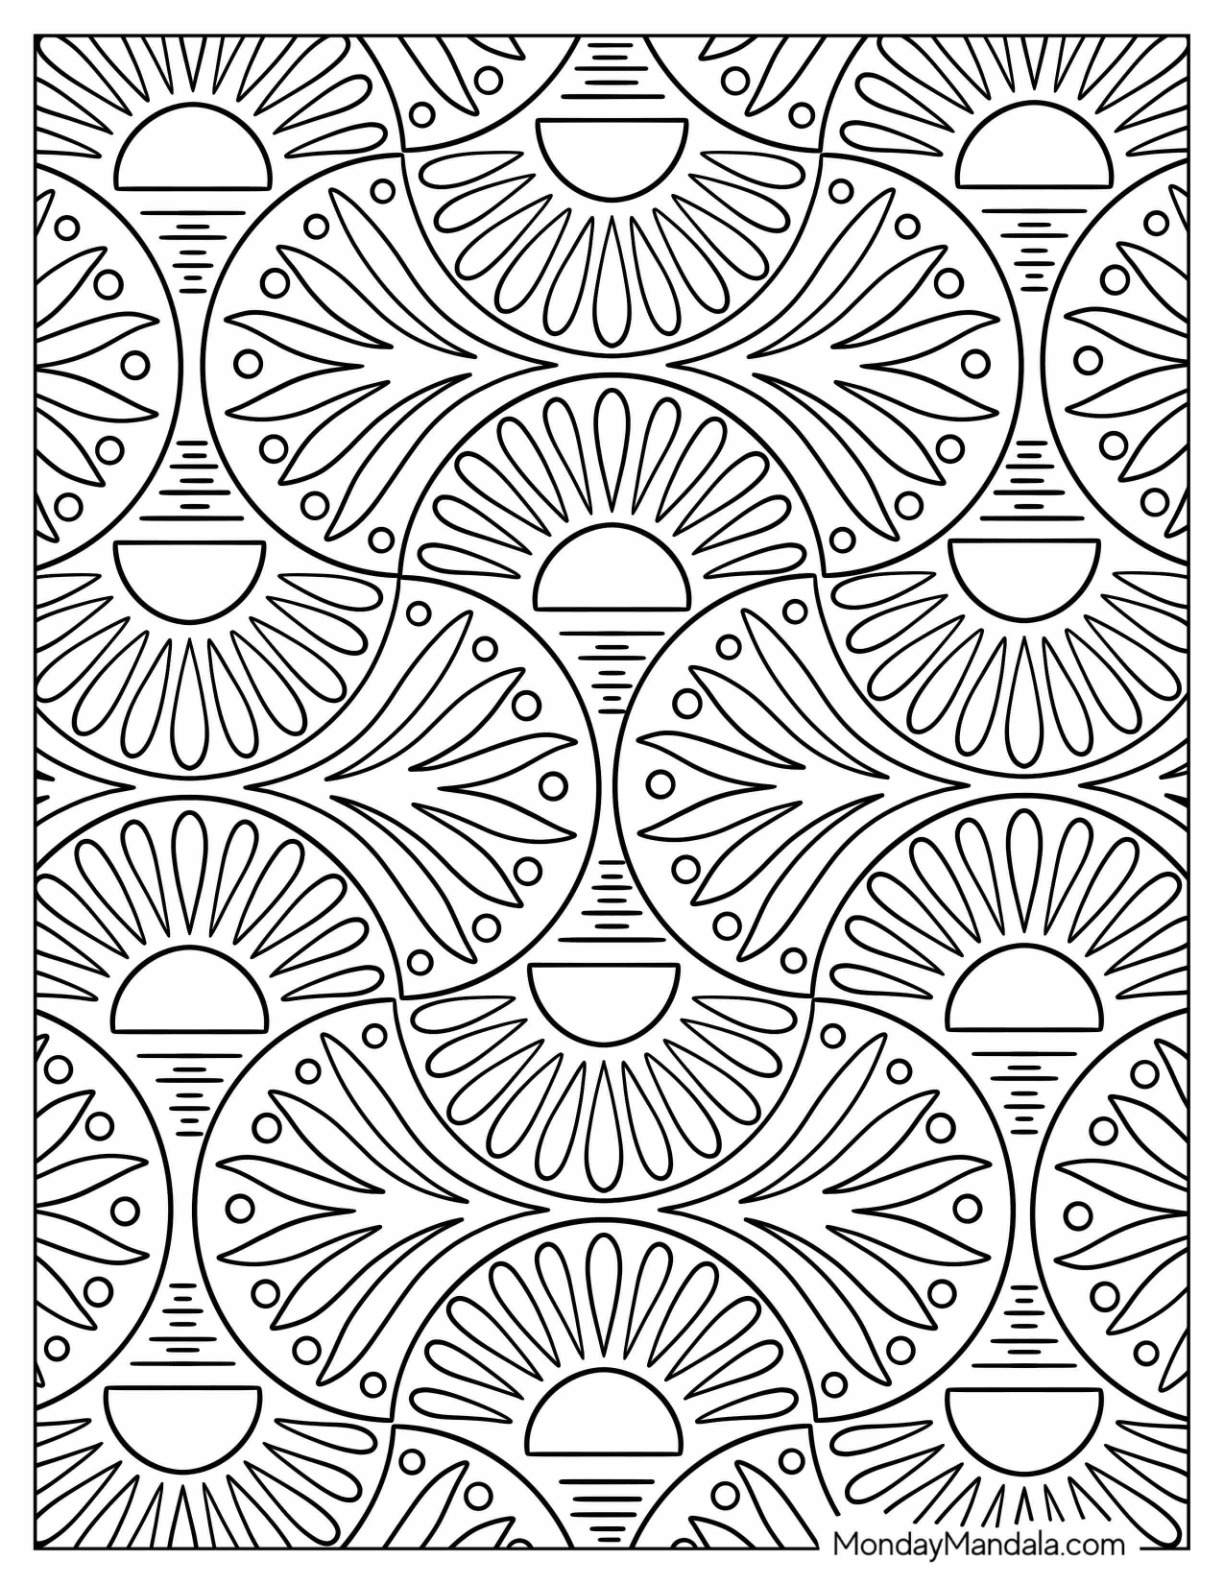 Pattern coloring pages free pdf printables